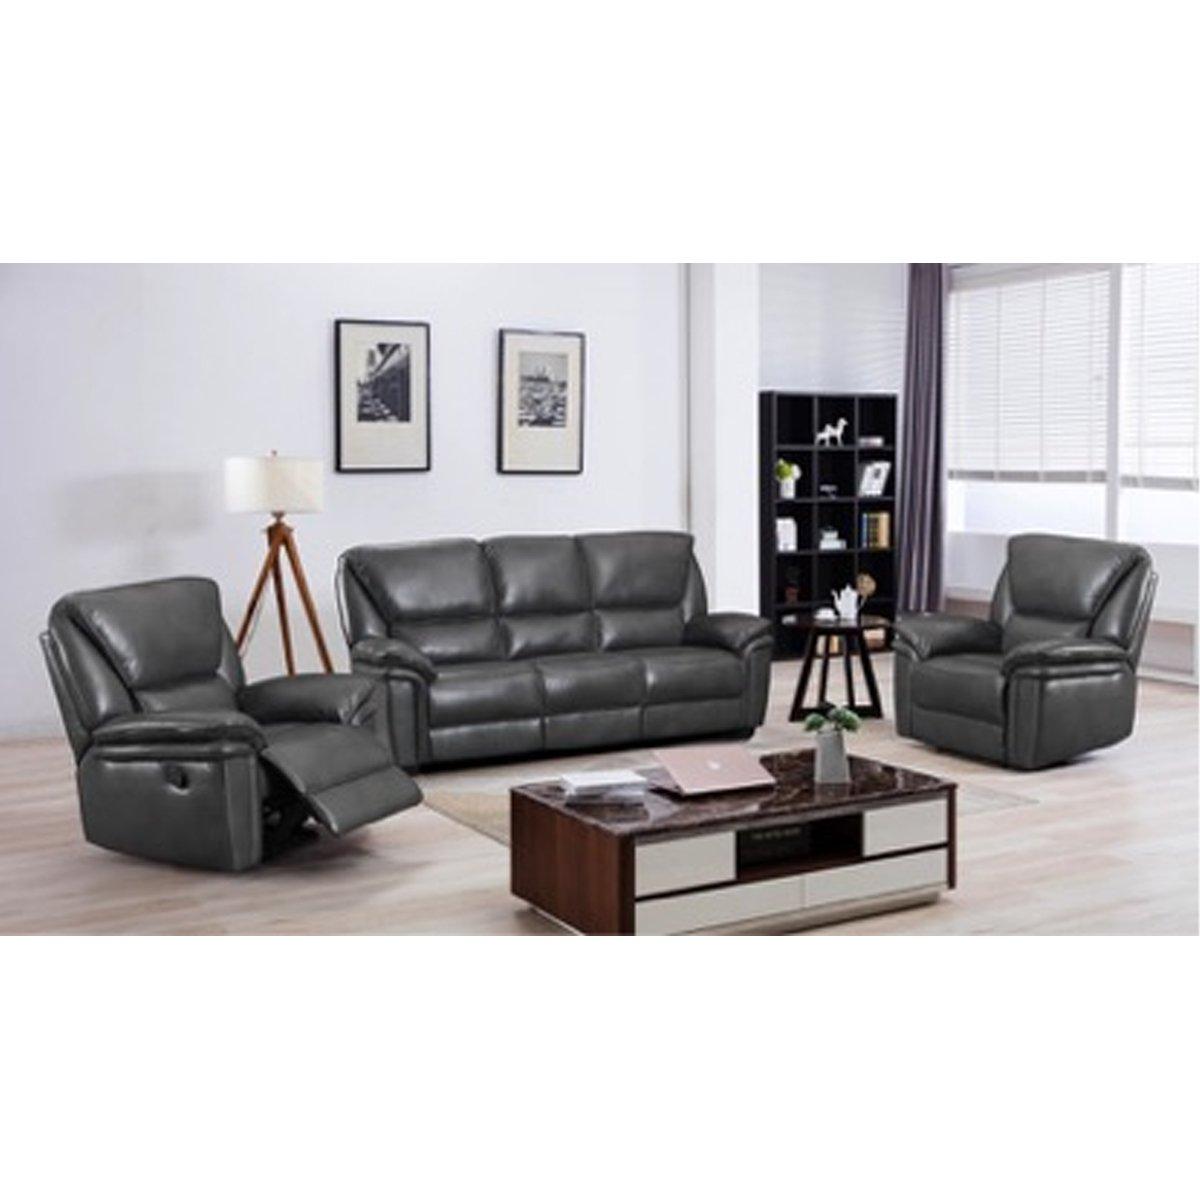 Boston Grey Leather Large 3 Piece Sofa Suite Manual Reclining Armchairs + Static 3 Seater Seater Sof